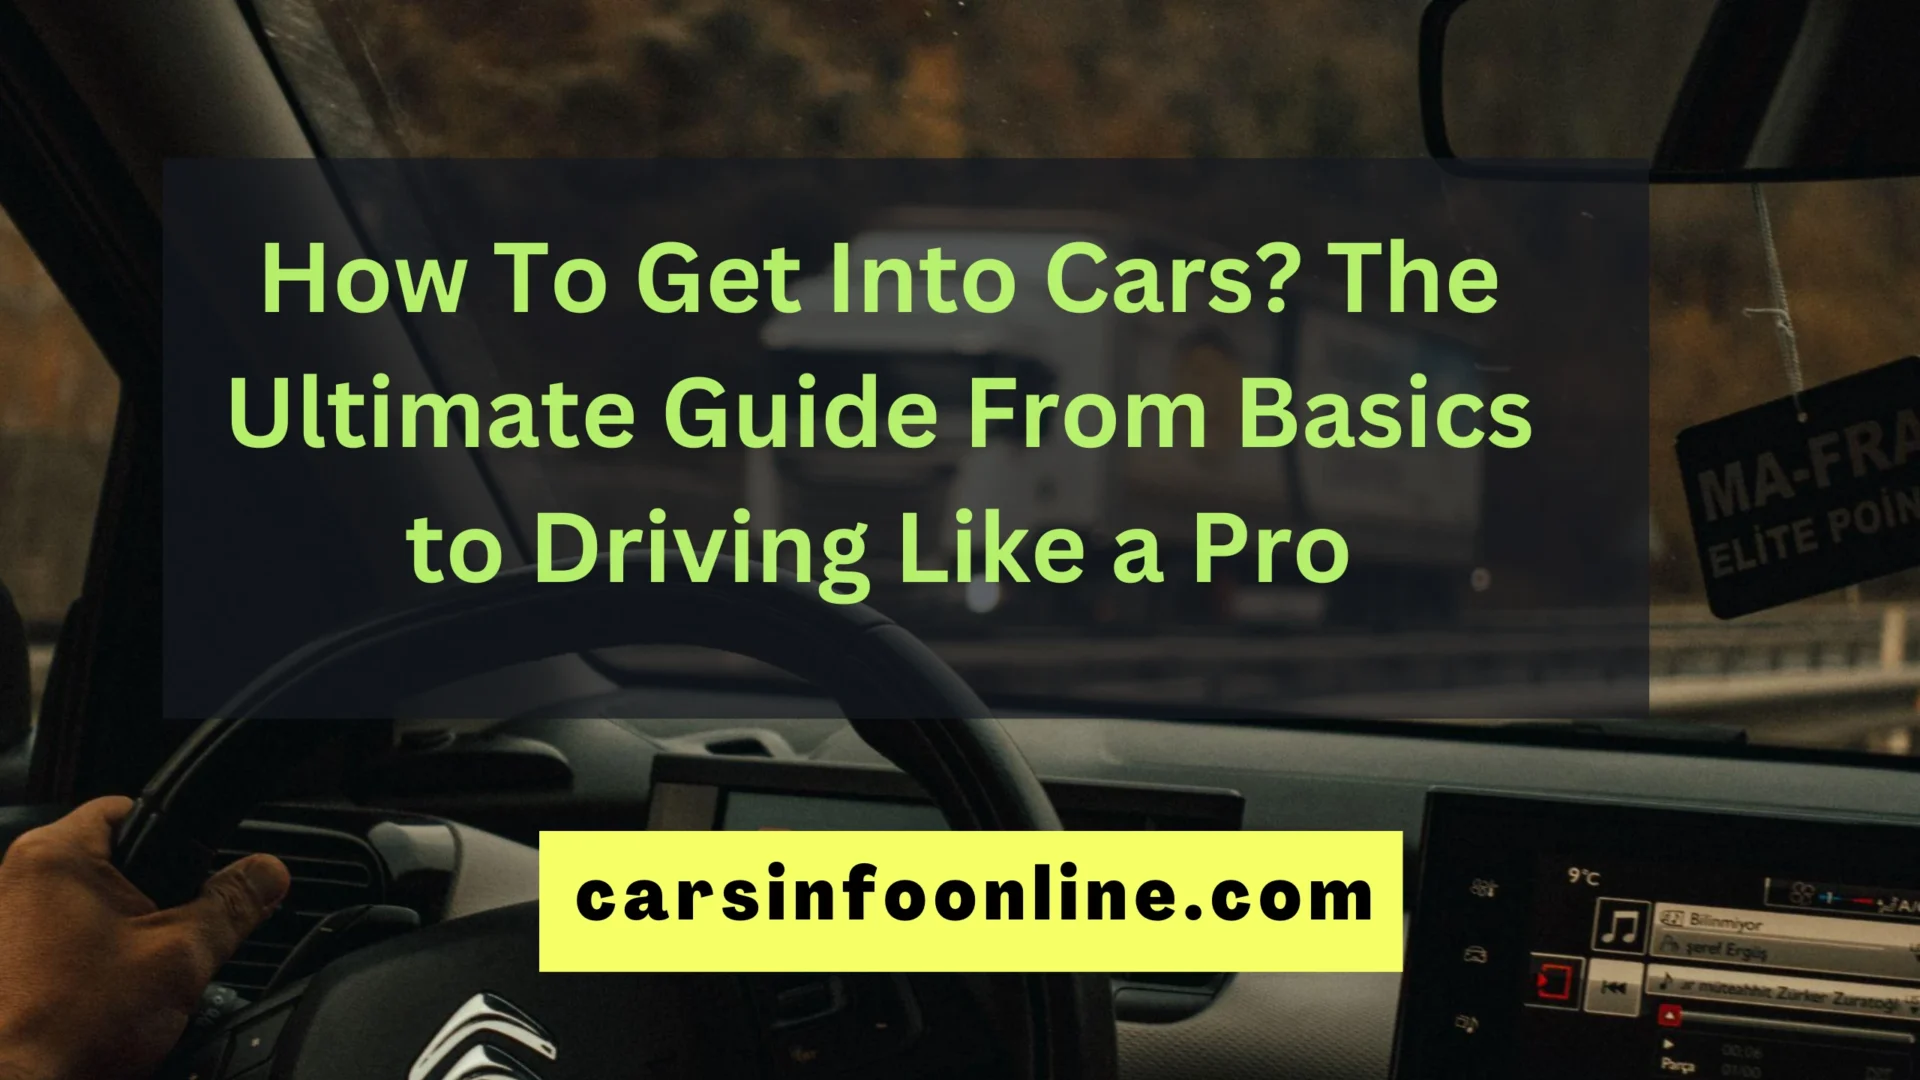 How To Get Into Cars The Ultimate Guide From Basics to Driving Like a Pro